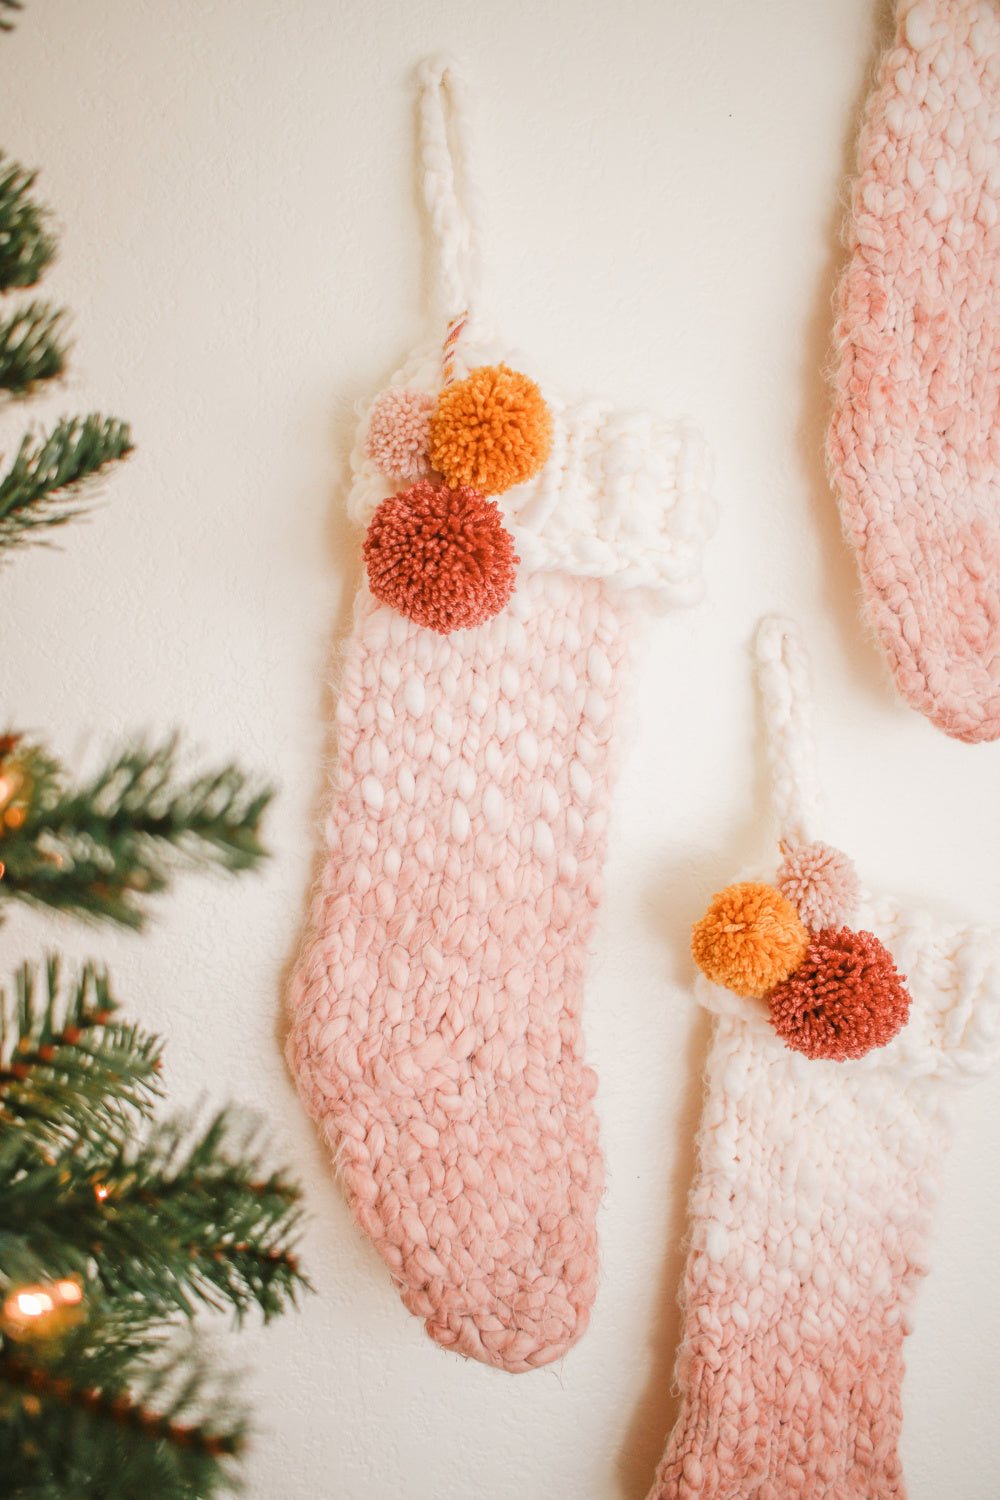 Knit stockings with Tulip Permanent Fabric Dye